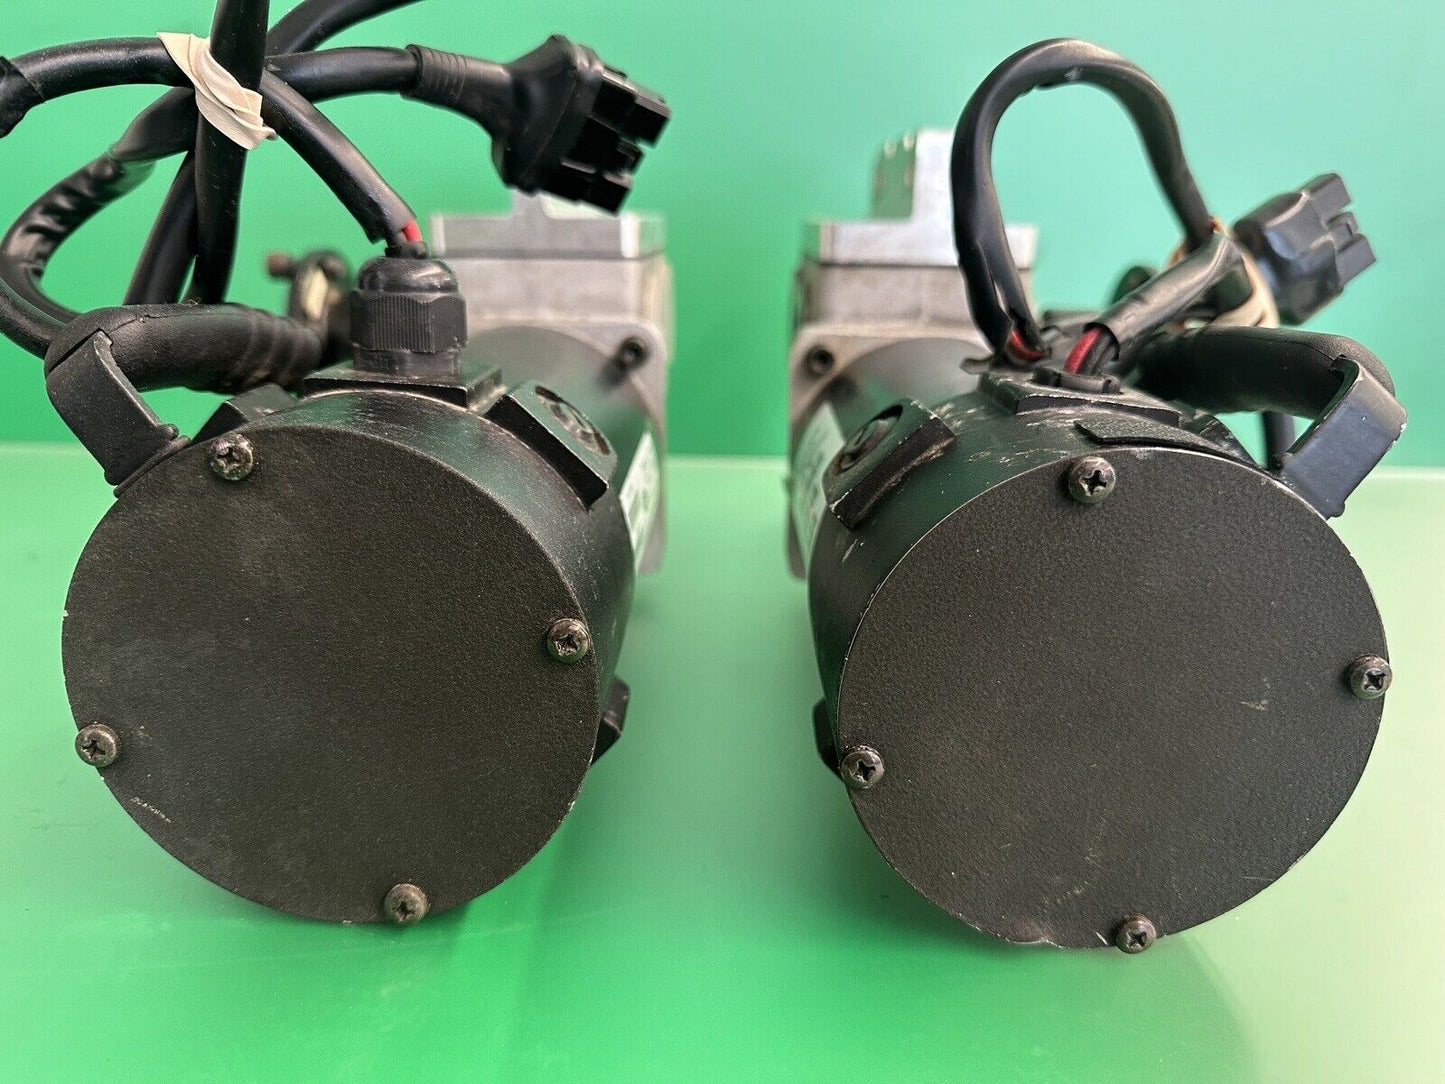 Left & Right Motors for Invacare TDX SP Power Wheelchair 1141688 / 1141687 #i903